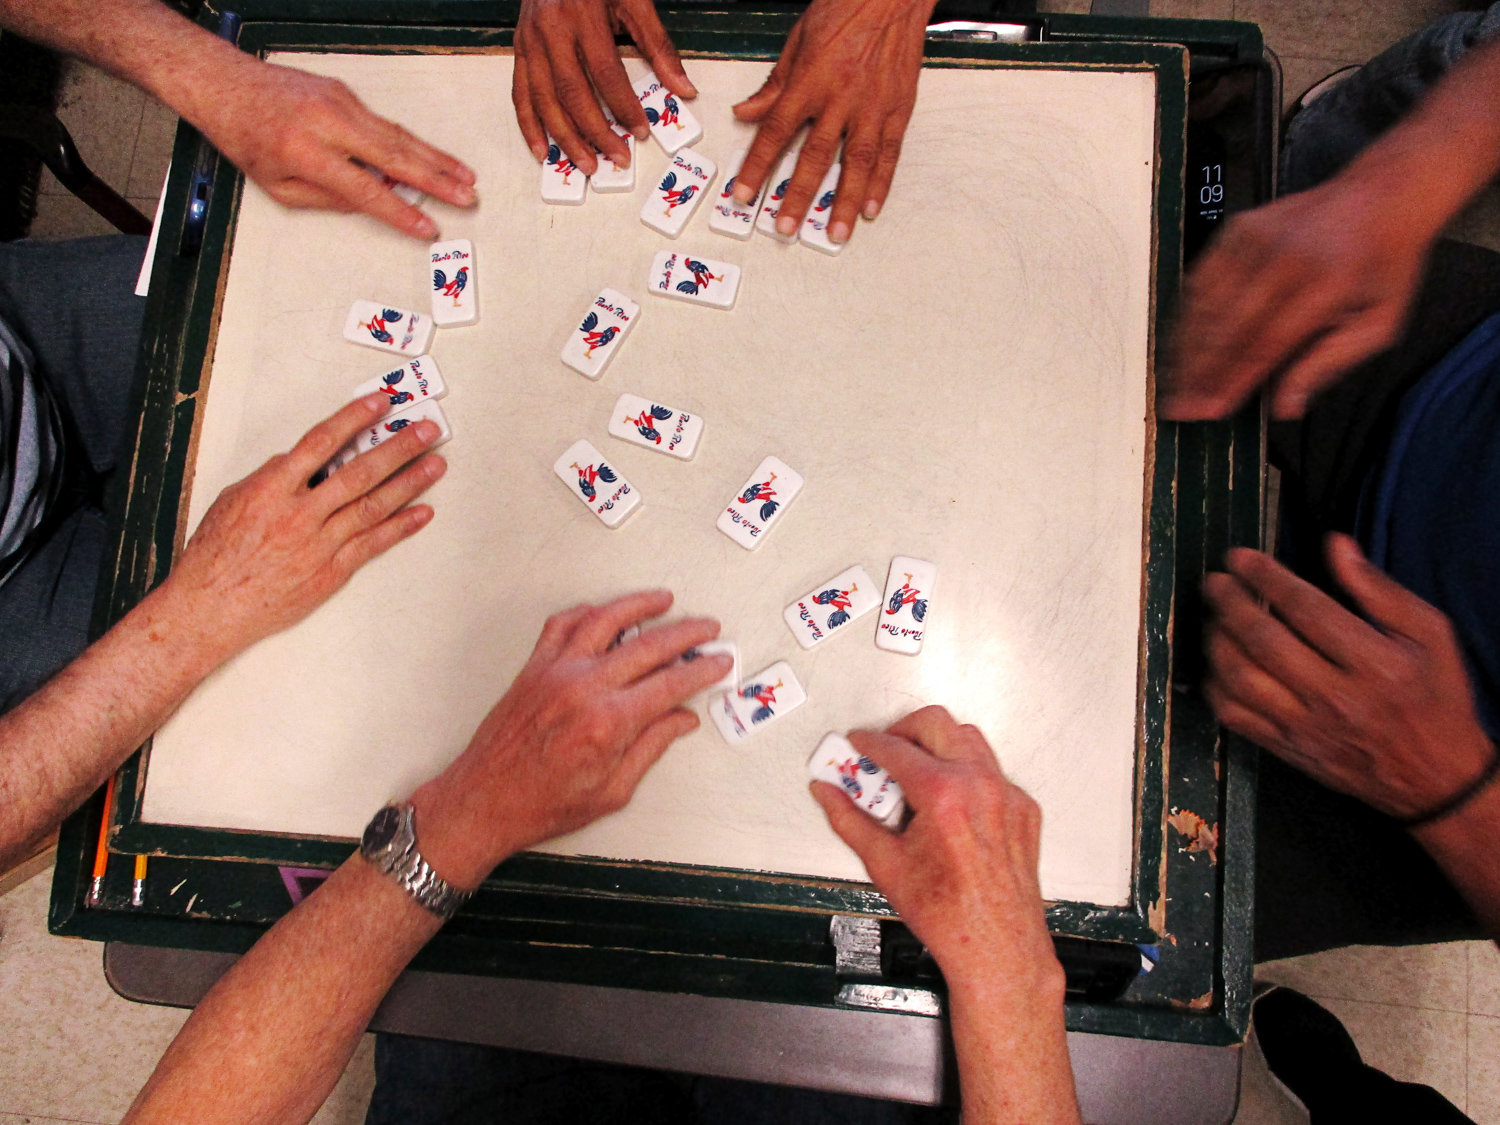 Bronx Senior Photo League member Vivian Hernandez’s photograph of a domino game is included in her group’s exhibition at the Bronx Documentary Center, on display through Feb. 2.